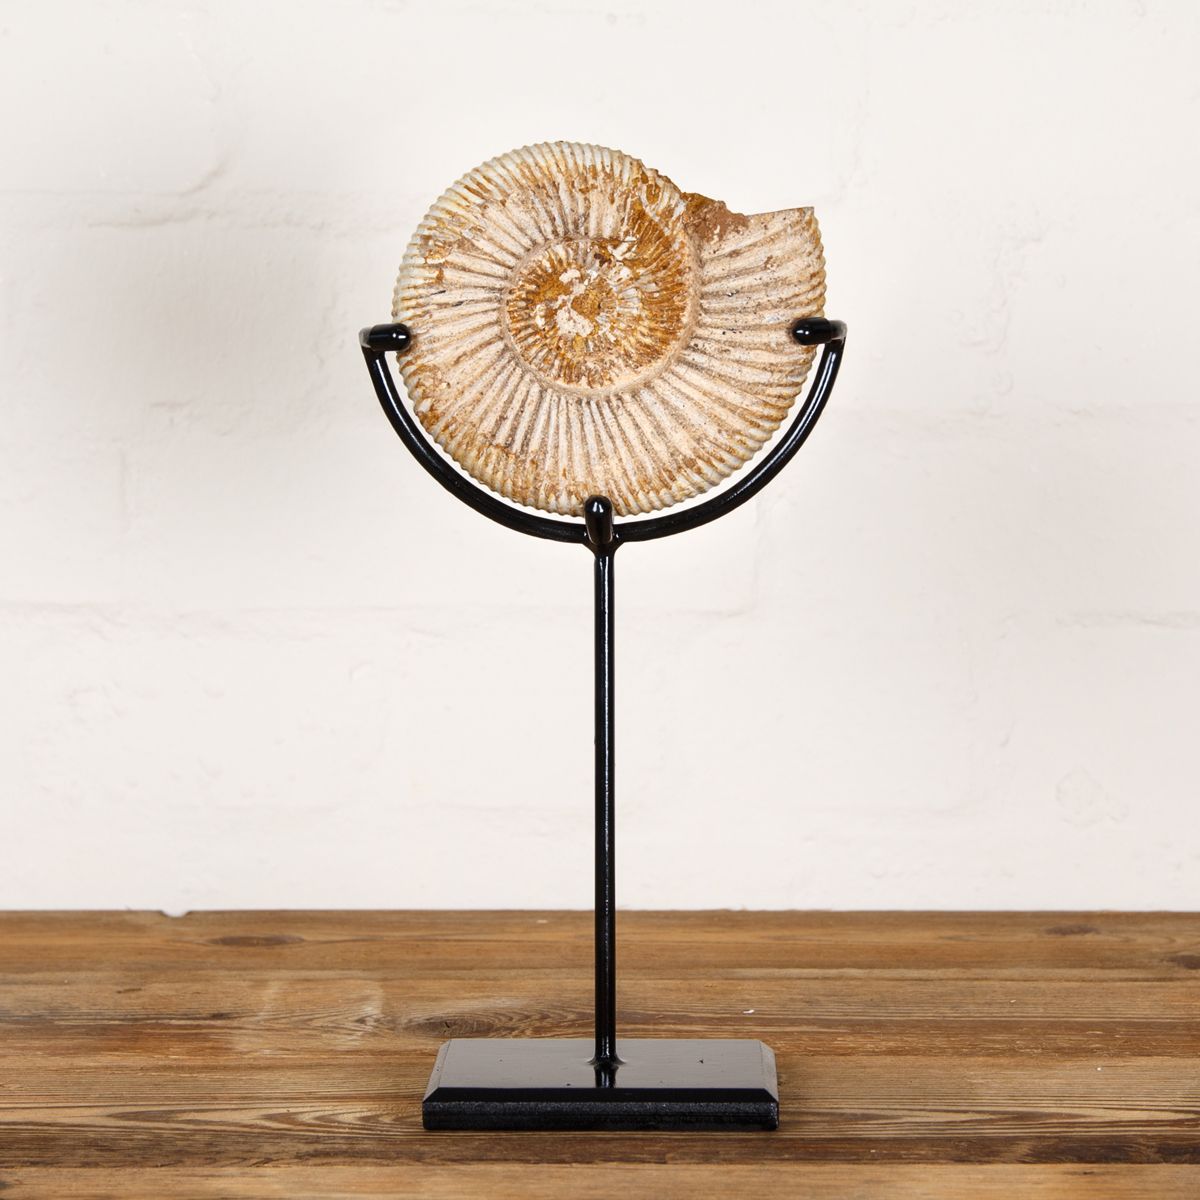 Minibeast 5.1 inch White Spine Ammonite Fossil on Stand (Cleoniceras sp)